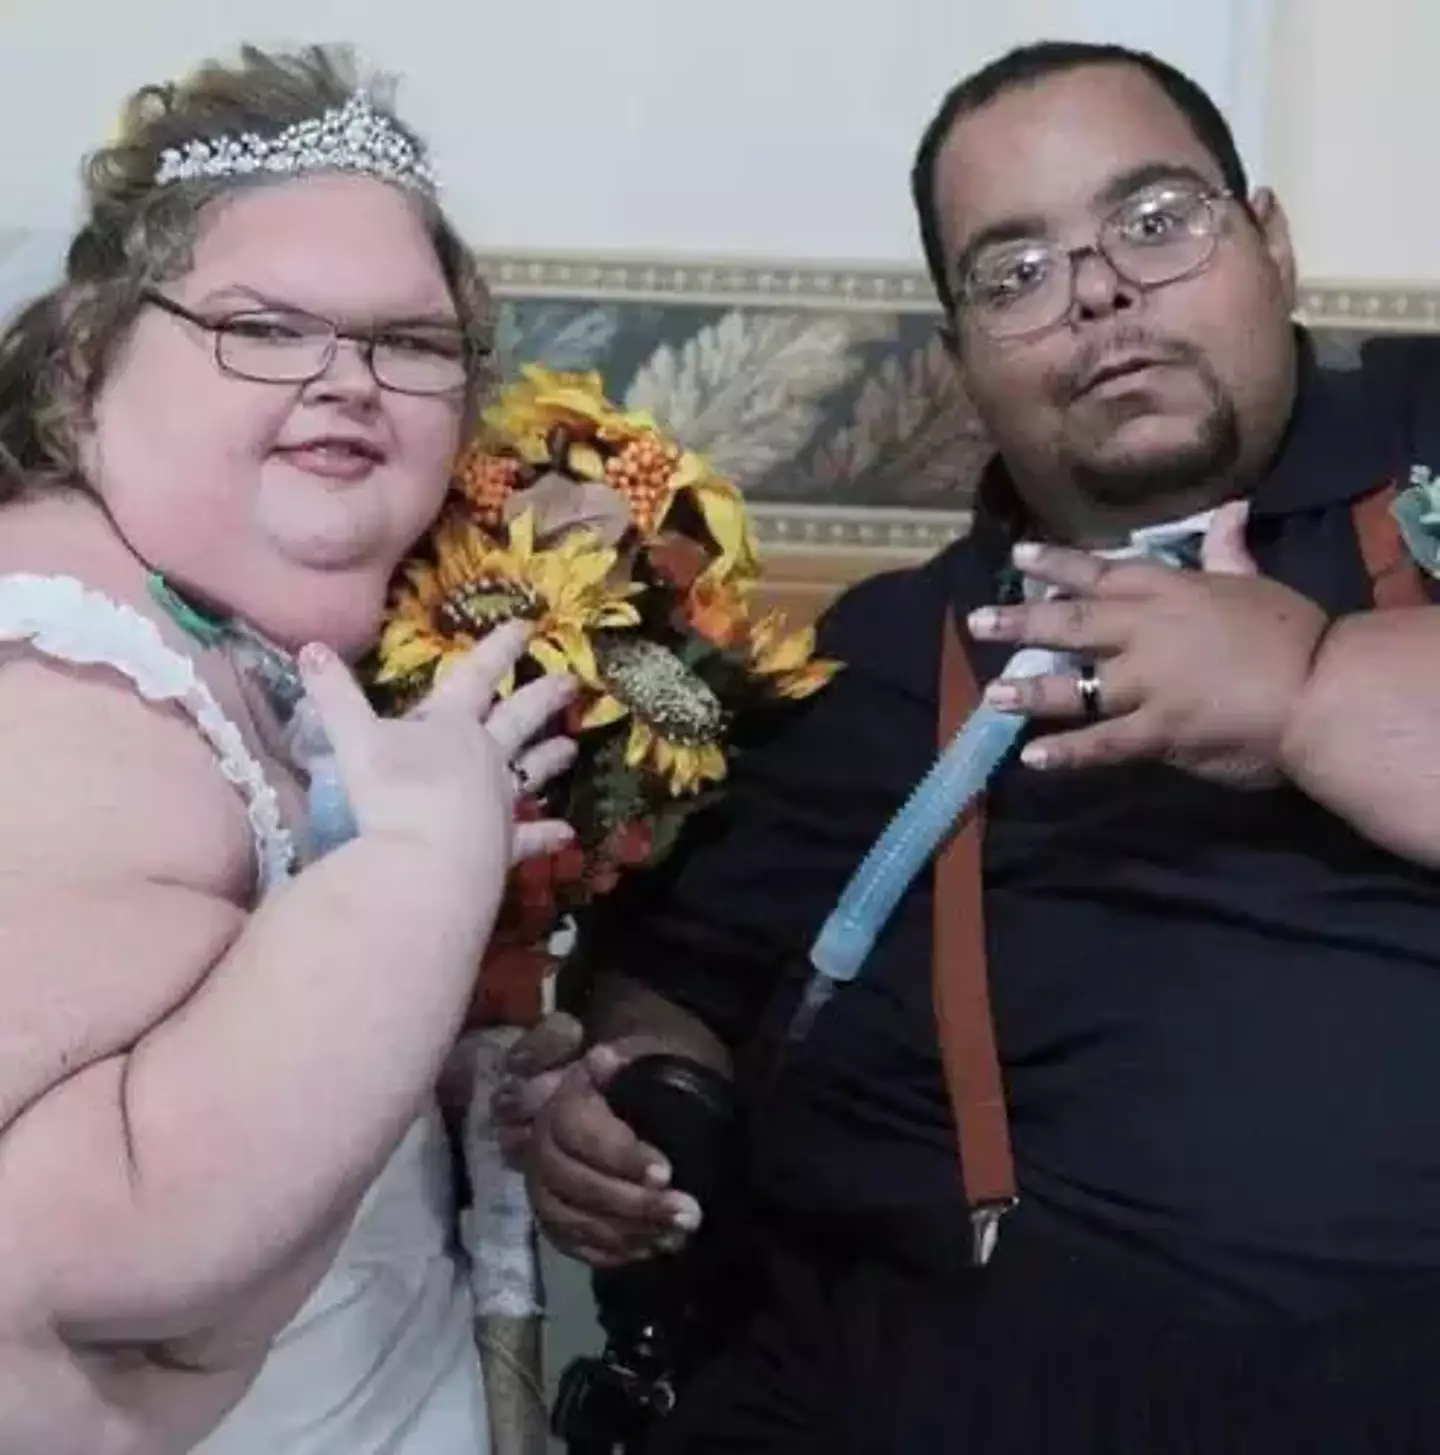 The pair first met at a weight loss rehabilitation facility in Ohio back in 2022.